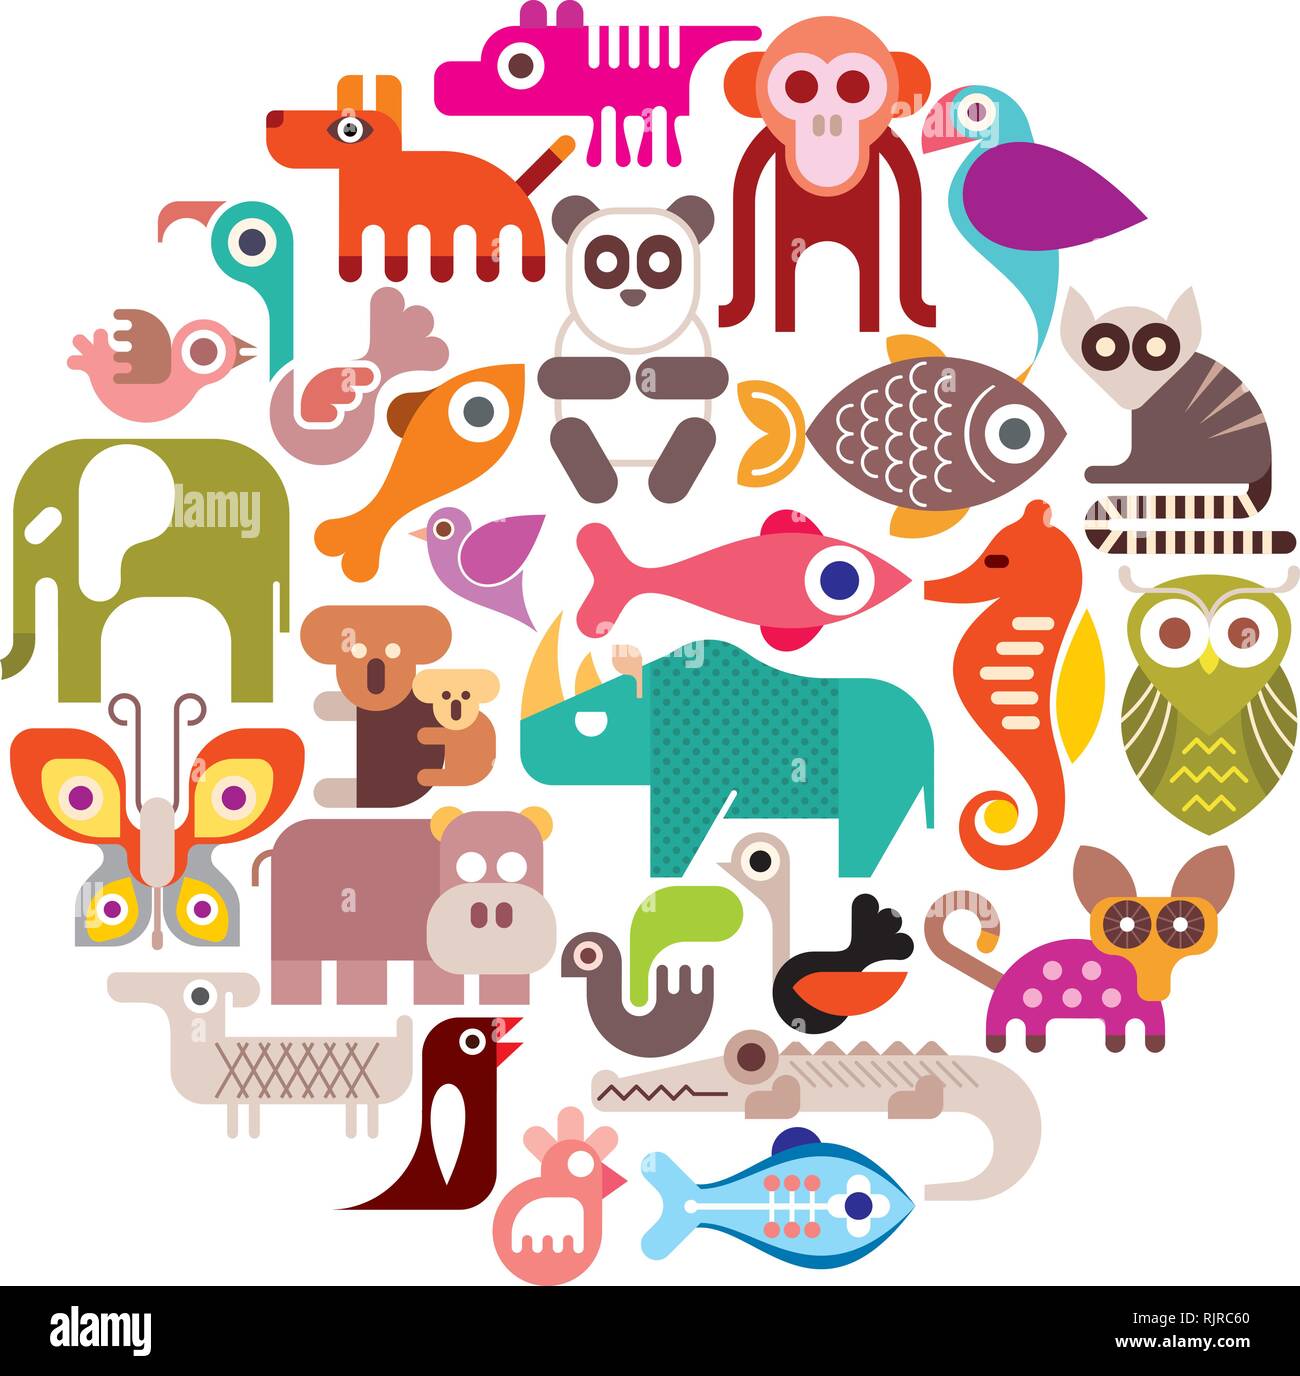 Animals, Birds and Fishes - round vector illustration. Isolated color icons on white background. Stock Vector